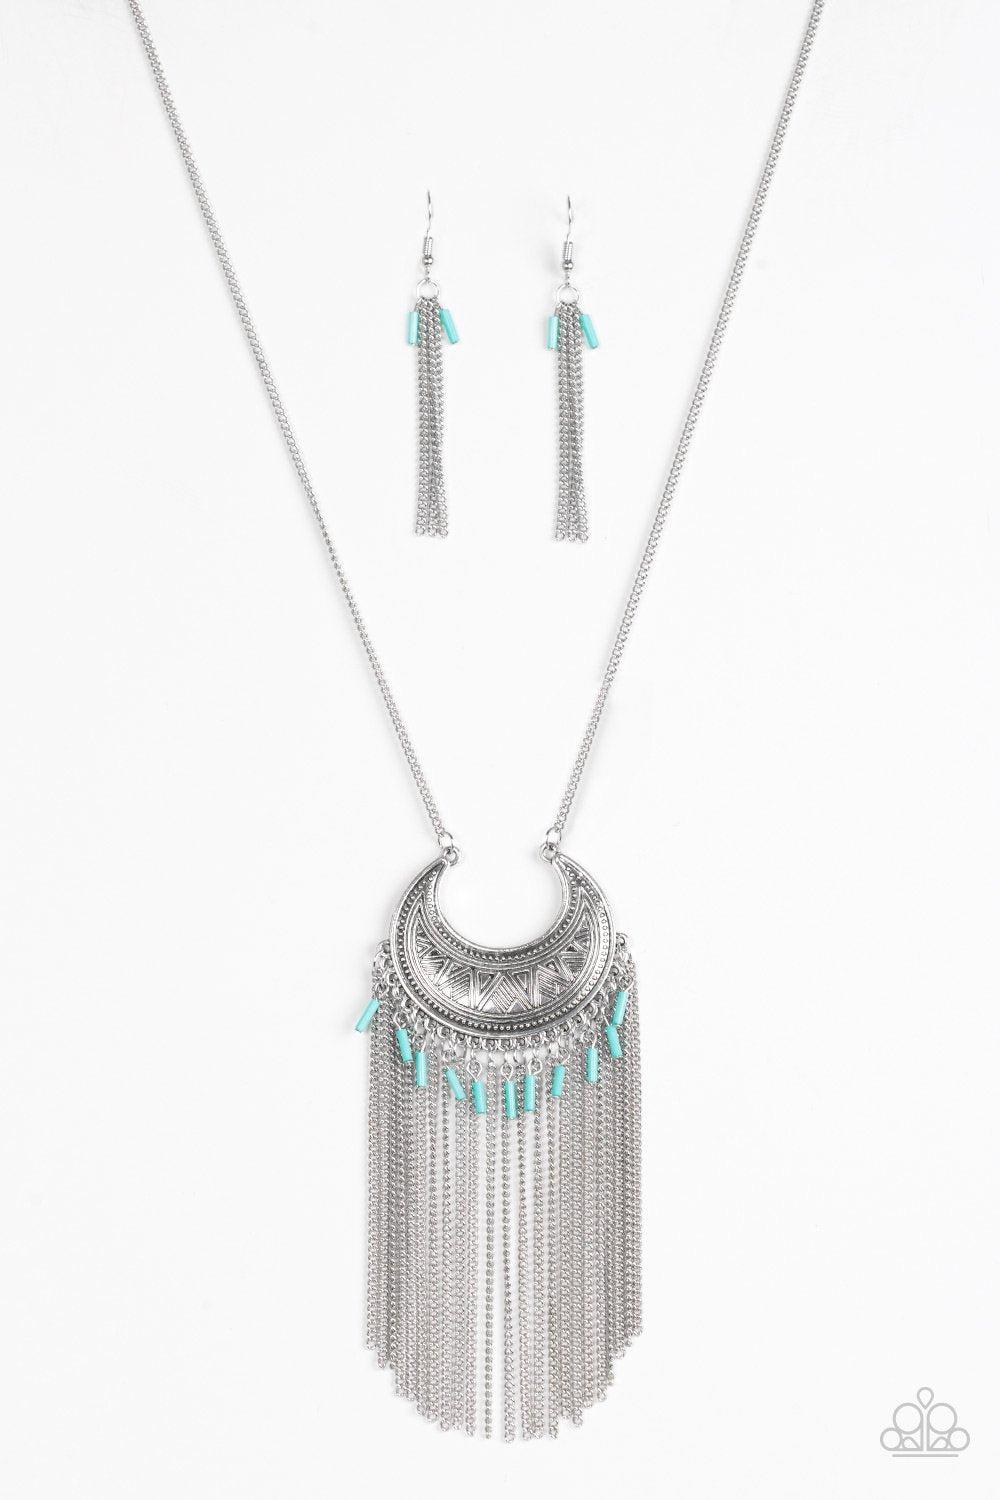 Desert Coyote Silver and Turquoise Blue Fringe Necklace - Paparazzi Accessories-CarasShop.com - $5 Jewelry by Cara Jewels